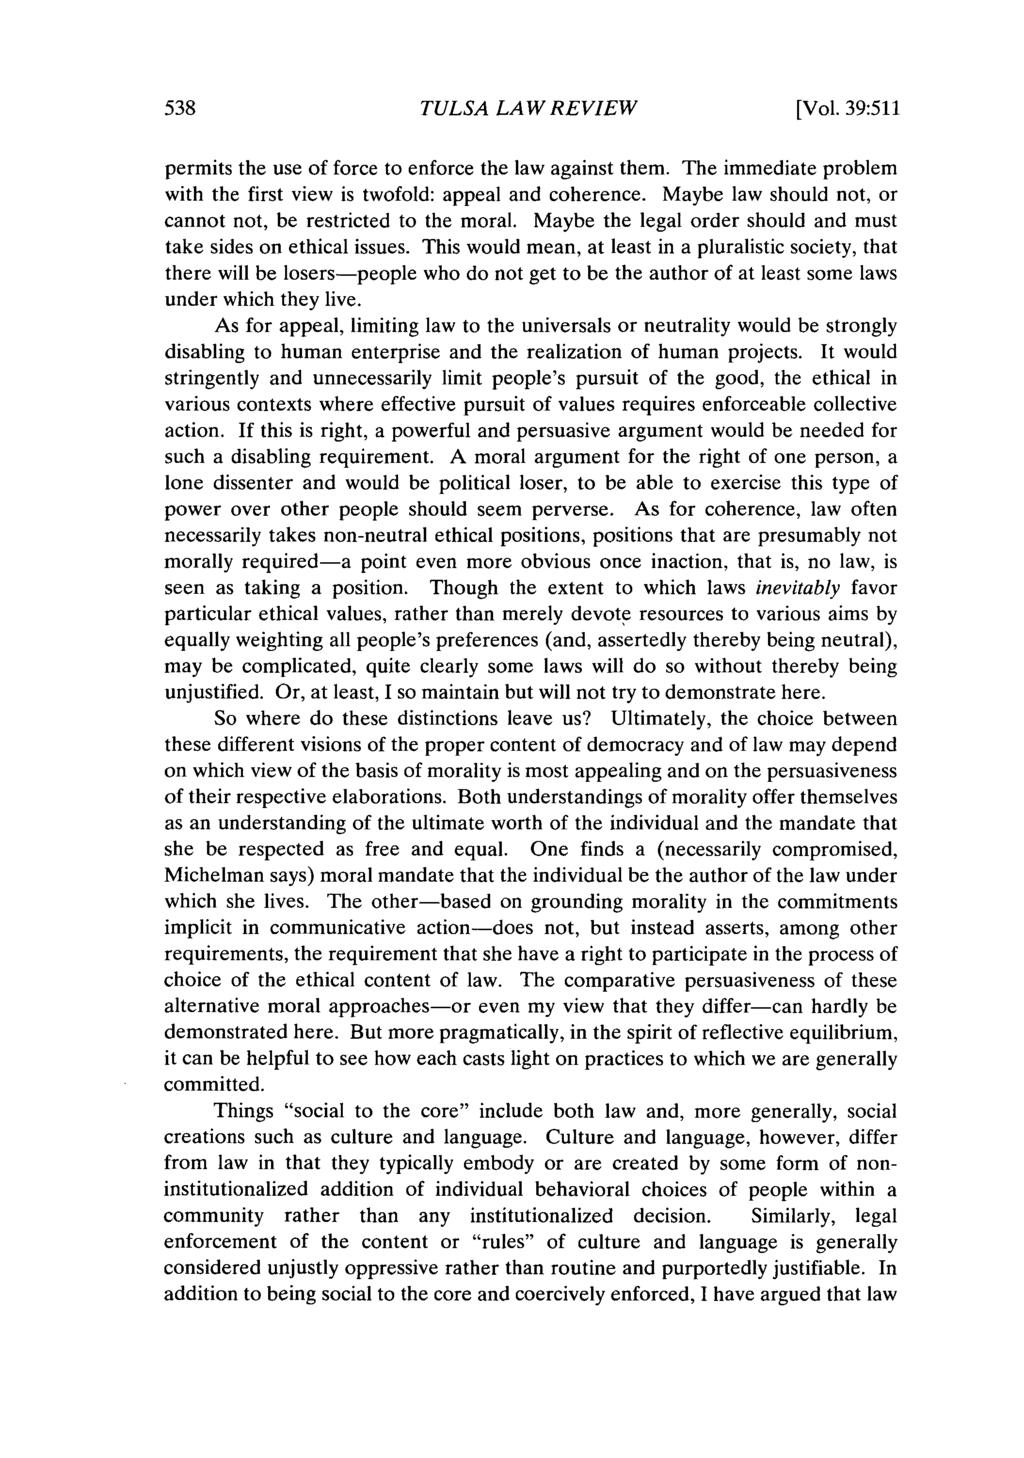 Tulsa Law Review, Vol. 39 [2003], Iss. 3, Art. 3 TULSA LAW REVIEW [Vol. 39:511 permits the use of force to enforce the law against them.